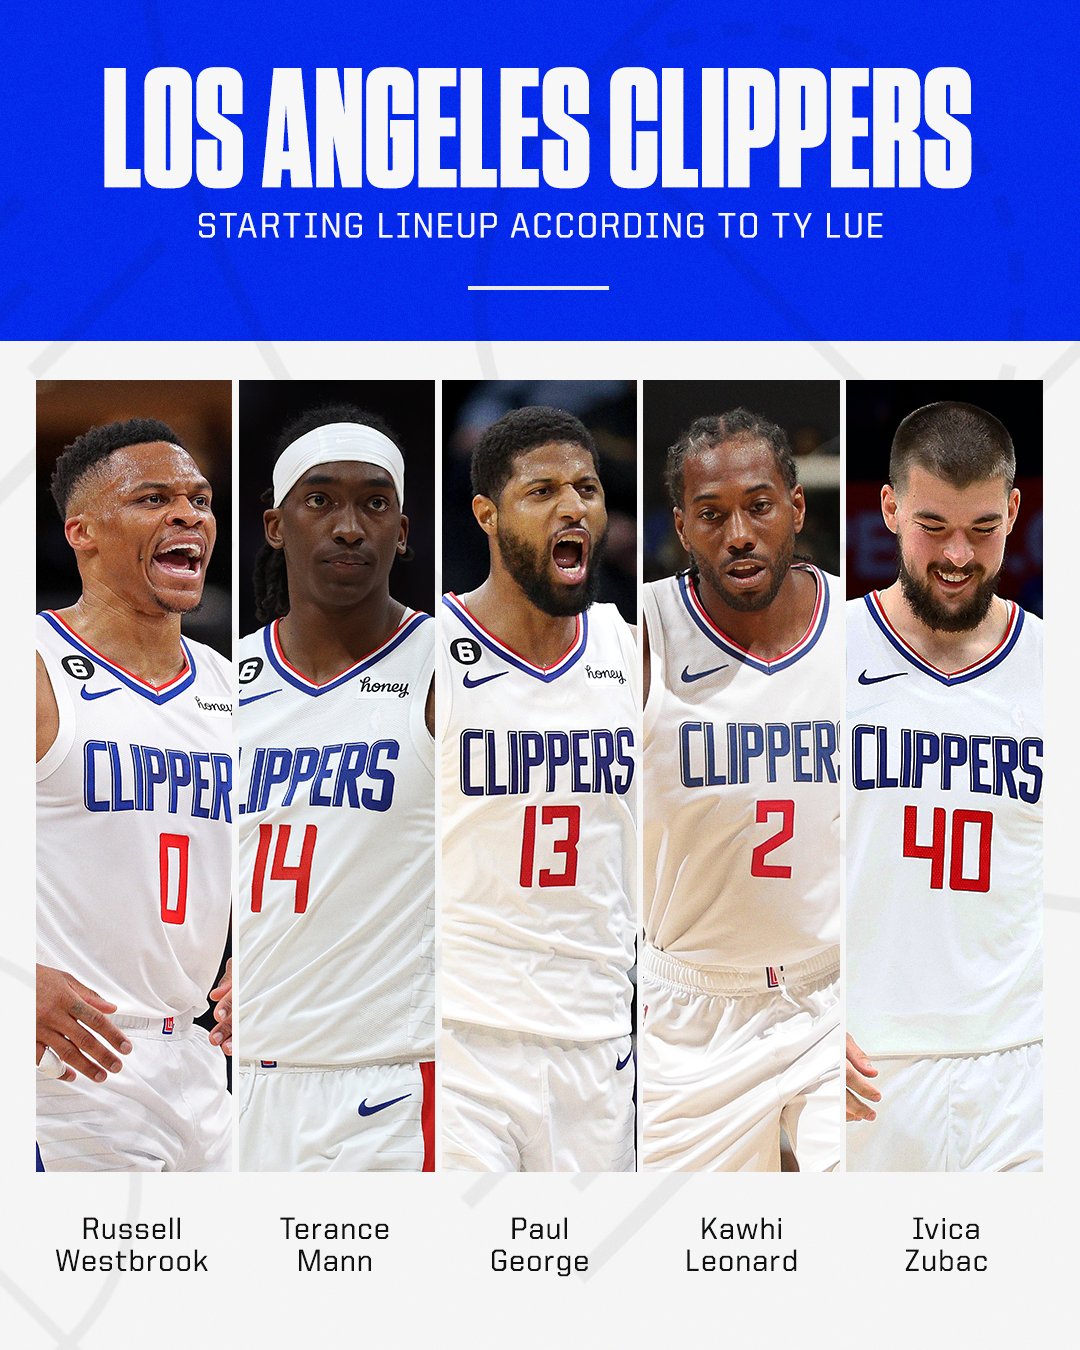 NBA on ESPN on X: How far is this Clippers team going? 👀 https